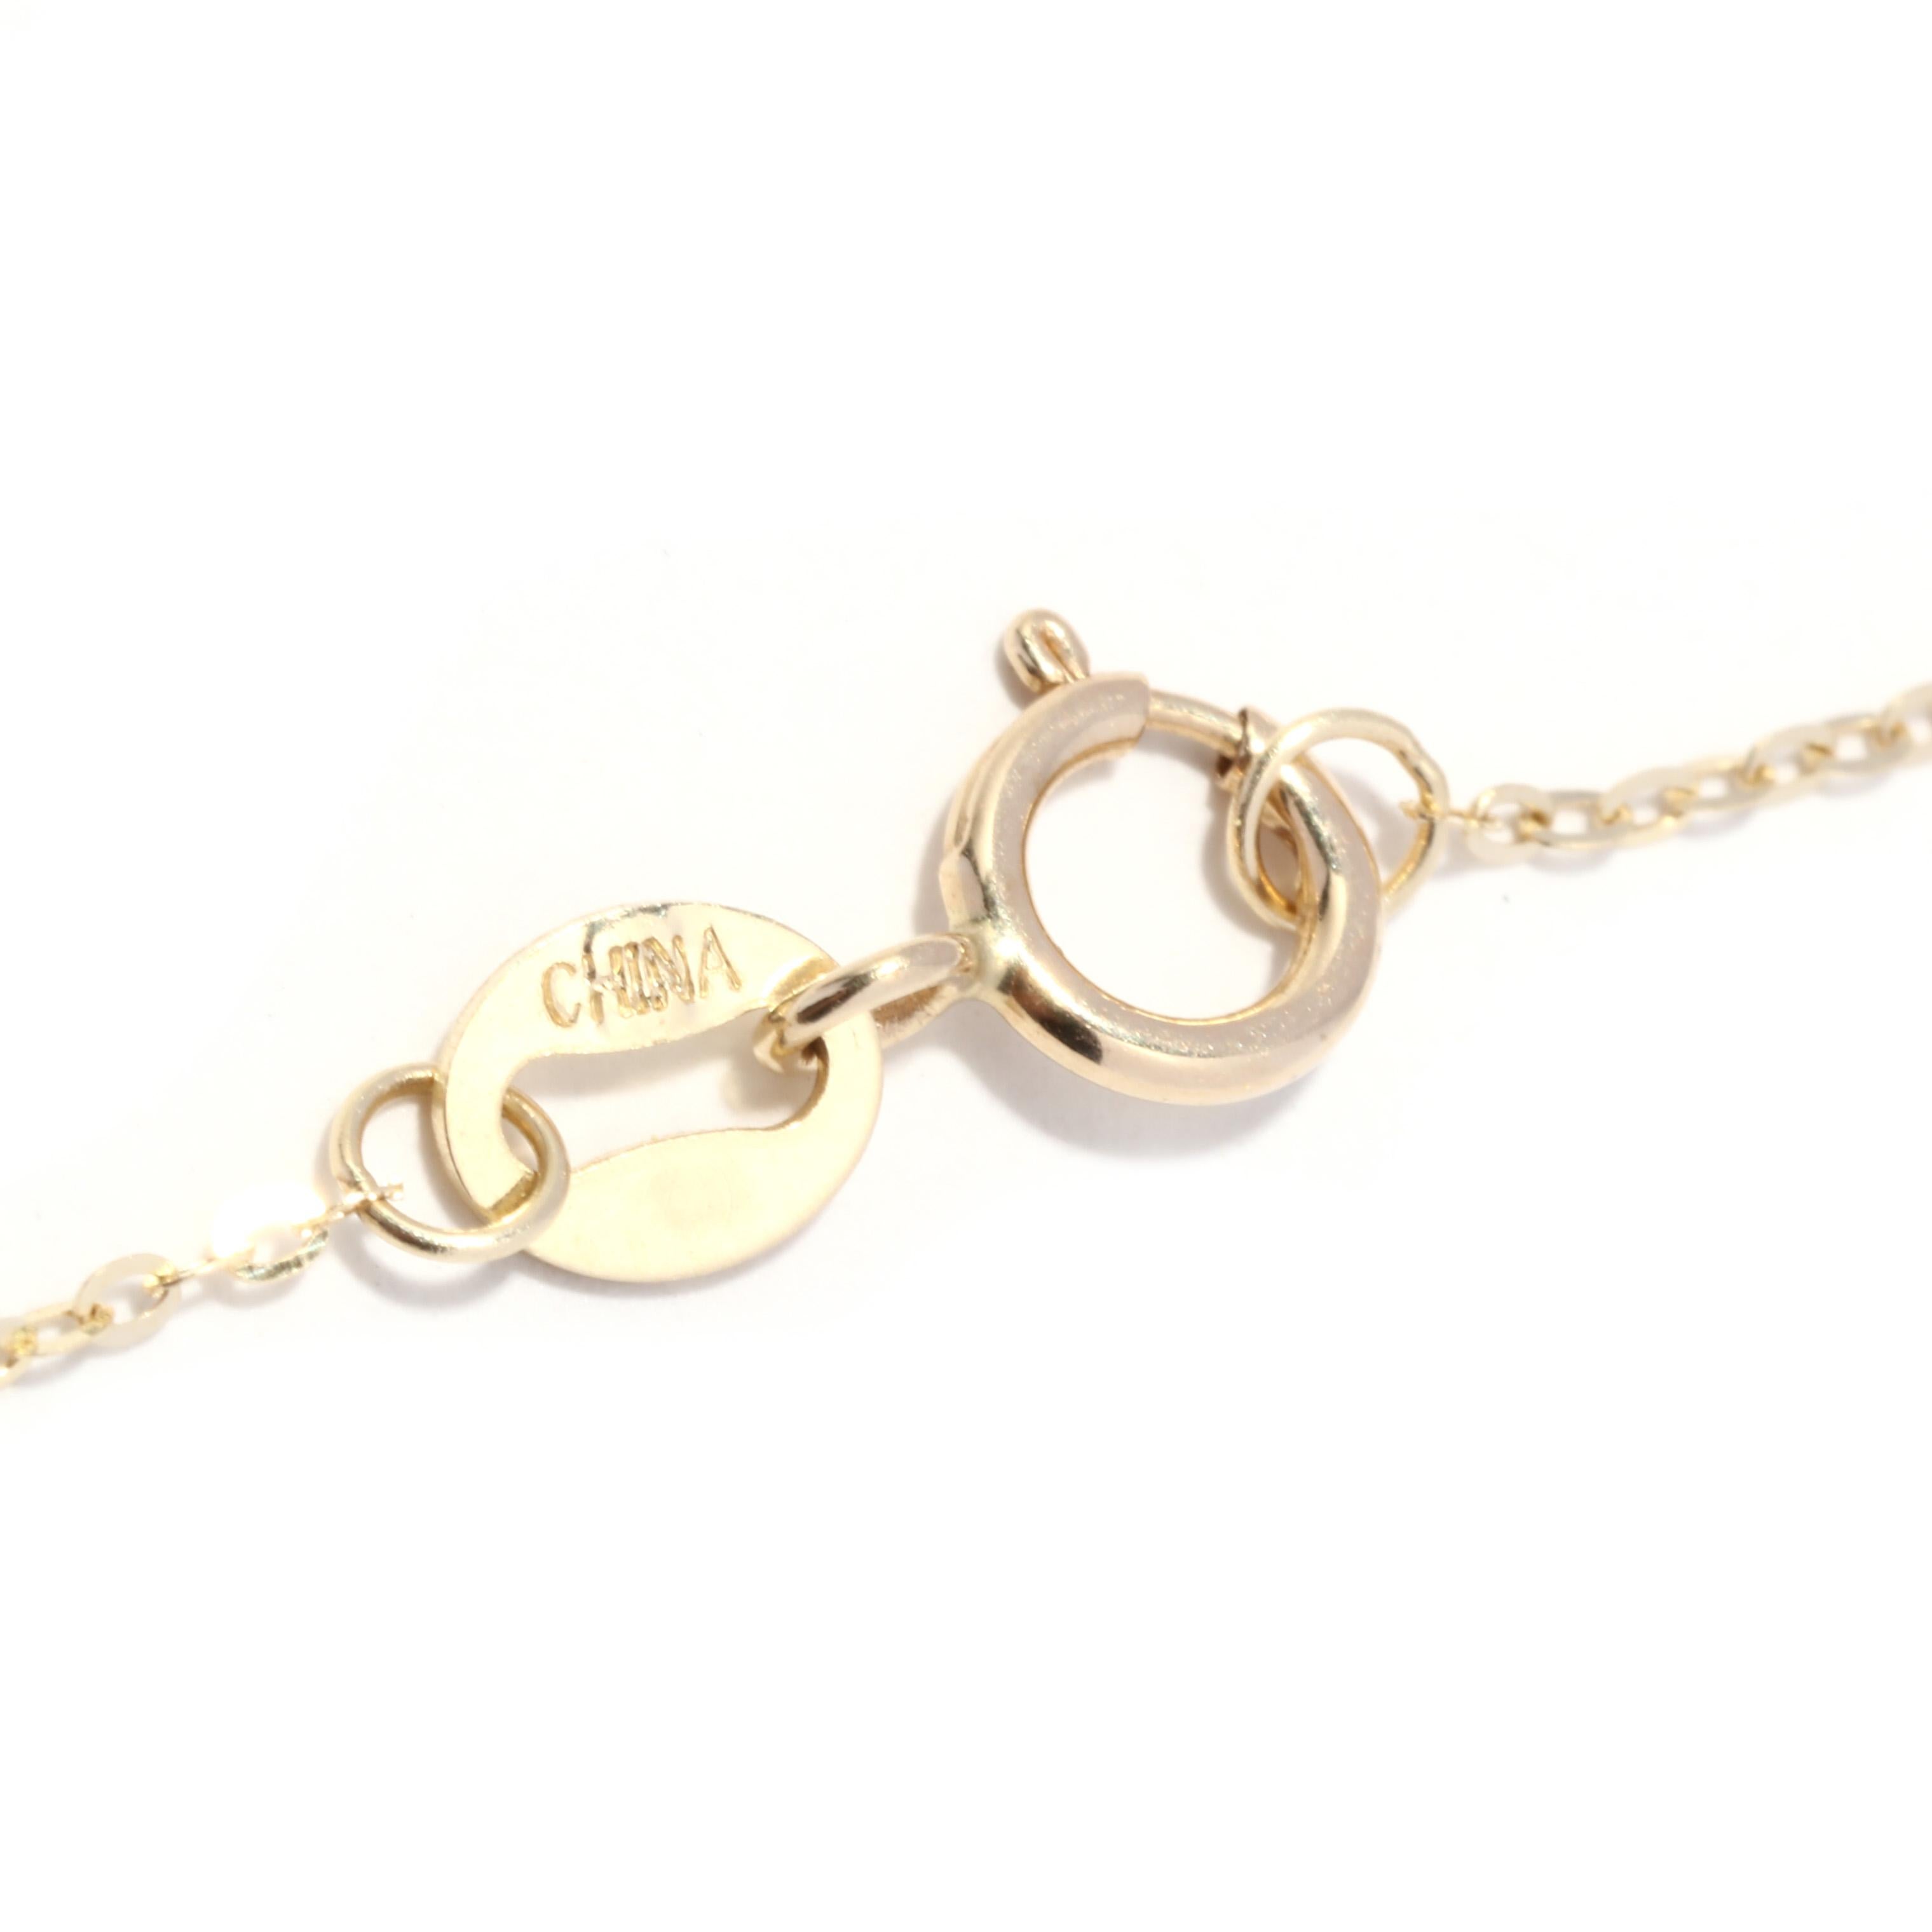 Women's or Men's Diamond Initial R Necklace, 14K Yellow Gold, Length 16 Inches, Single Stone